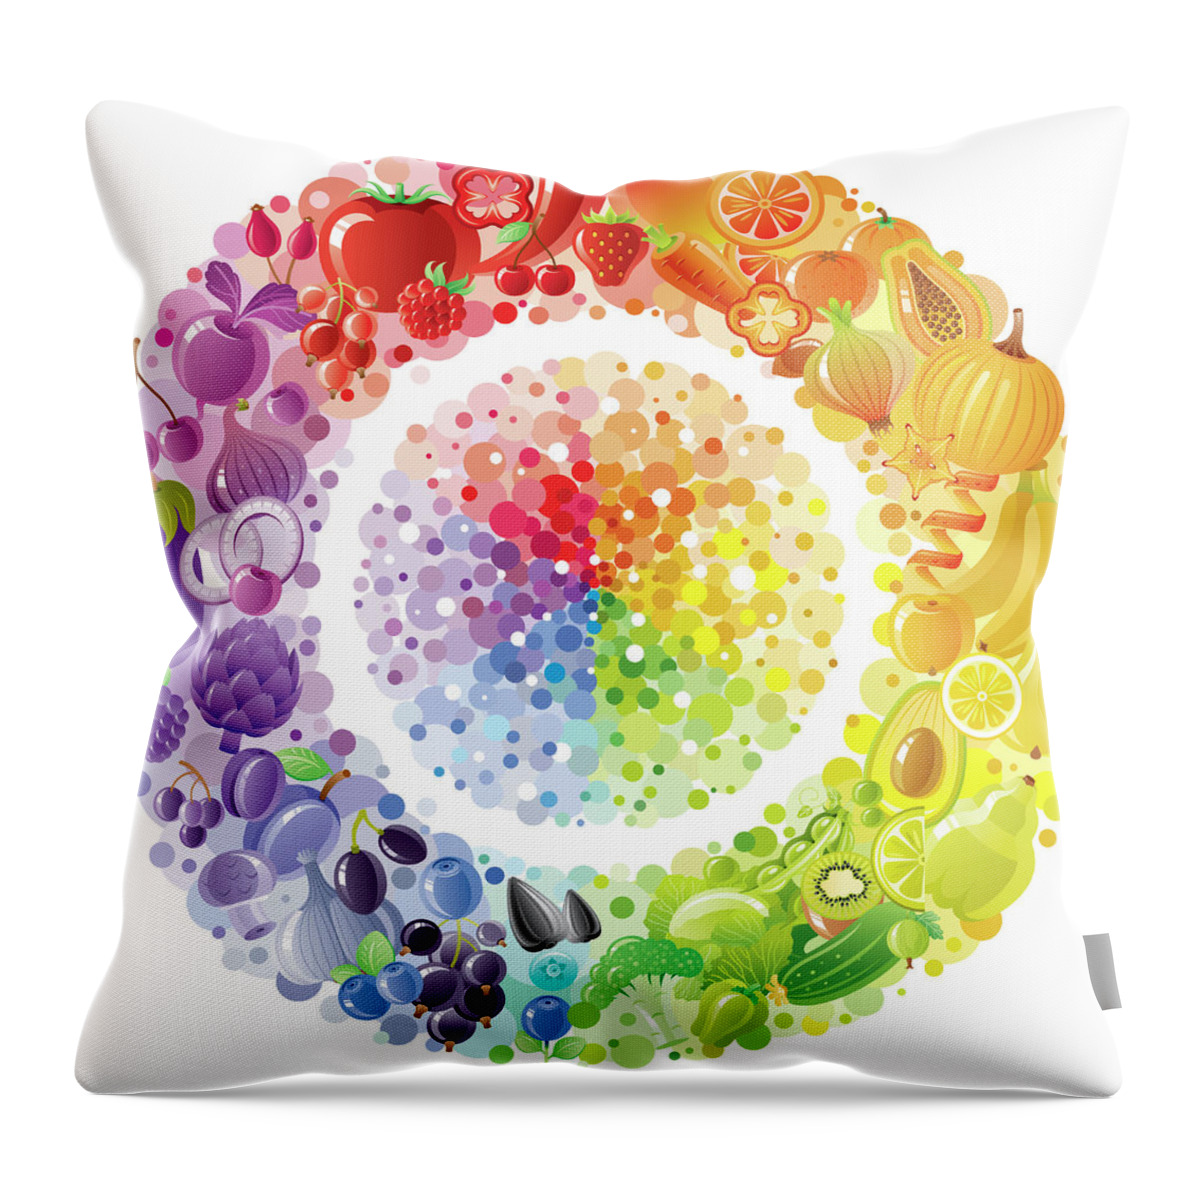 Nut Throw Pillow featuring the digital art Vegetarian Rainbow Plate Withe Fruits by O-che